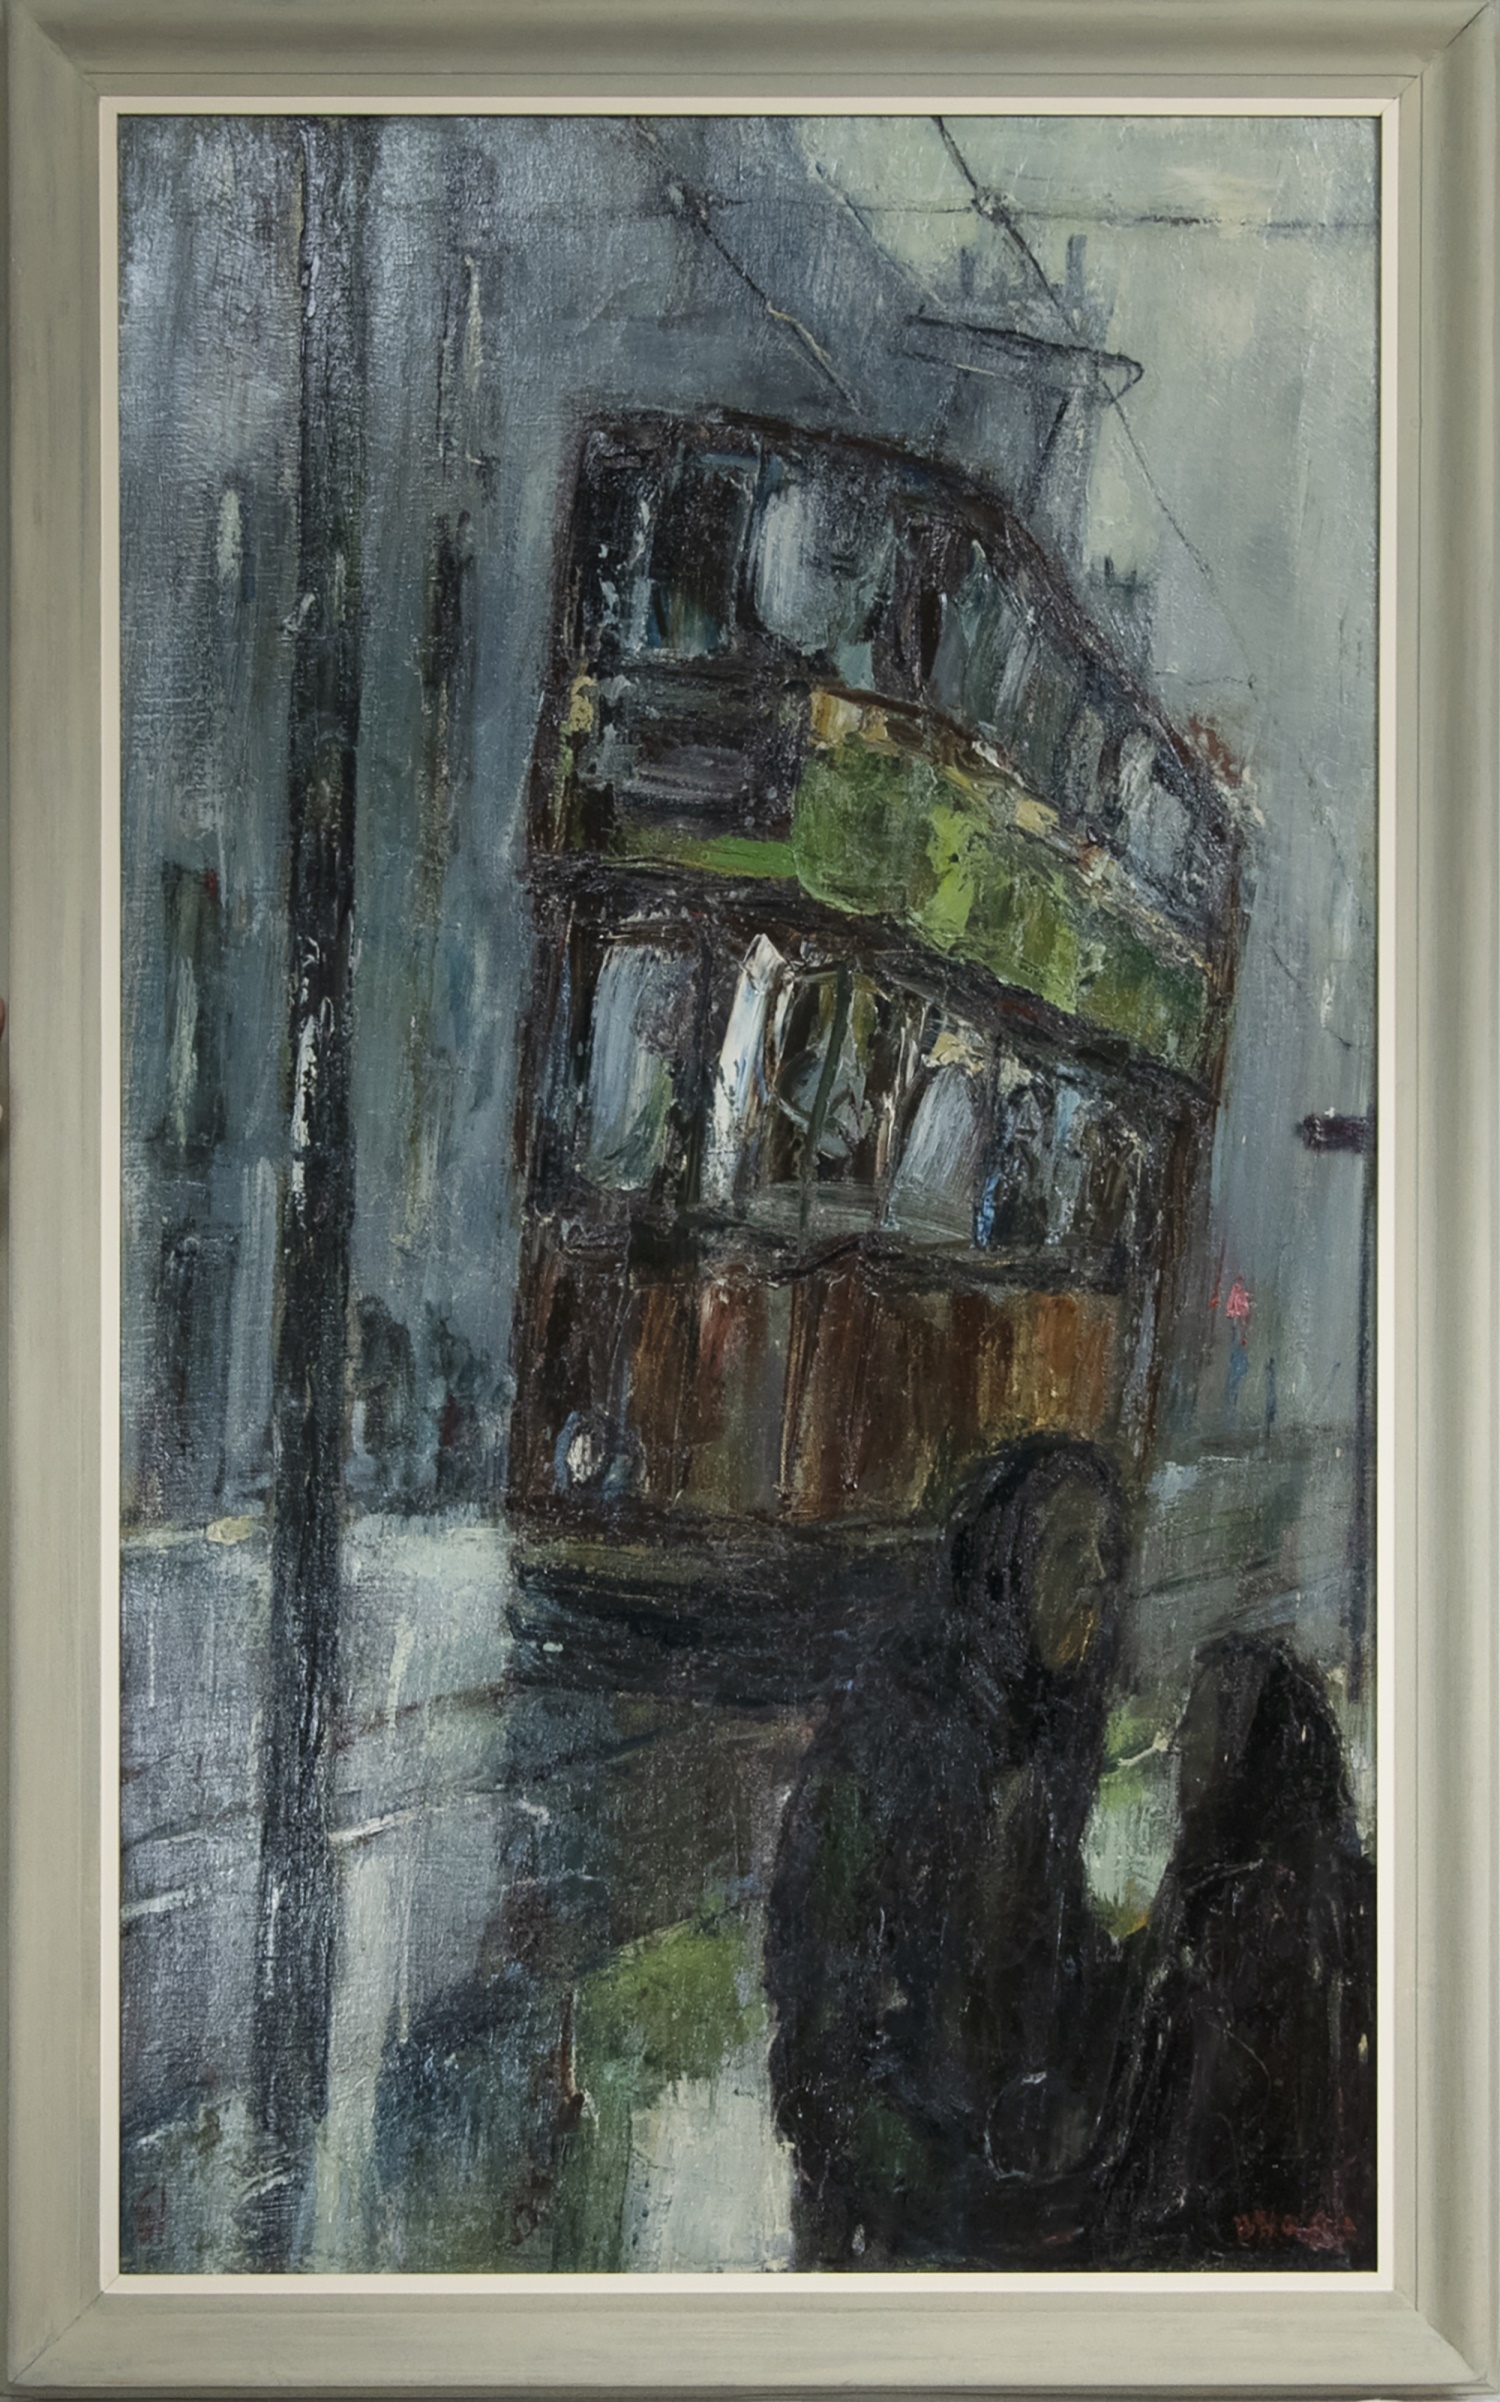 TRAM & FIGURES IN RAIN, BYRES ROAD, AN EXCEPTIONAL AND LARGE OIL BY HERBERT WHONE